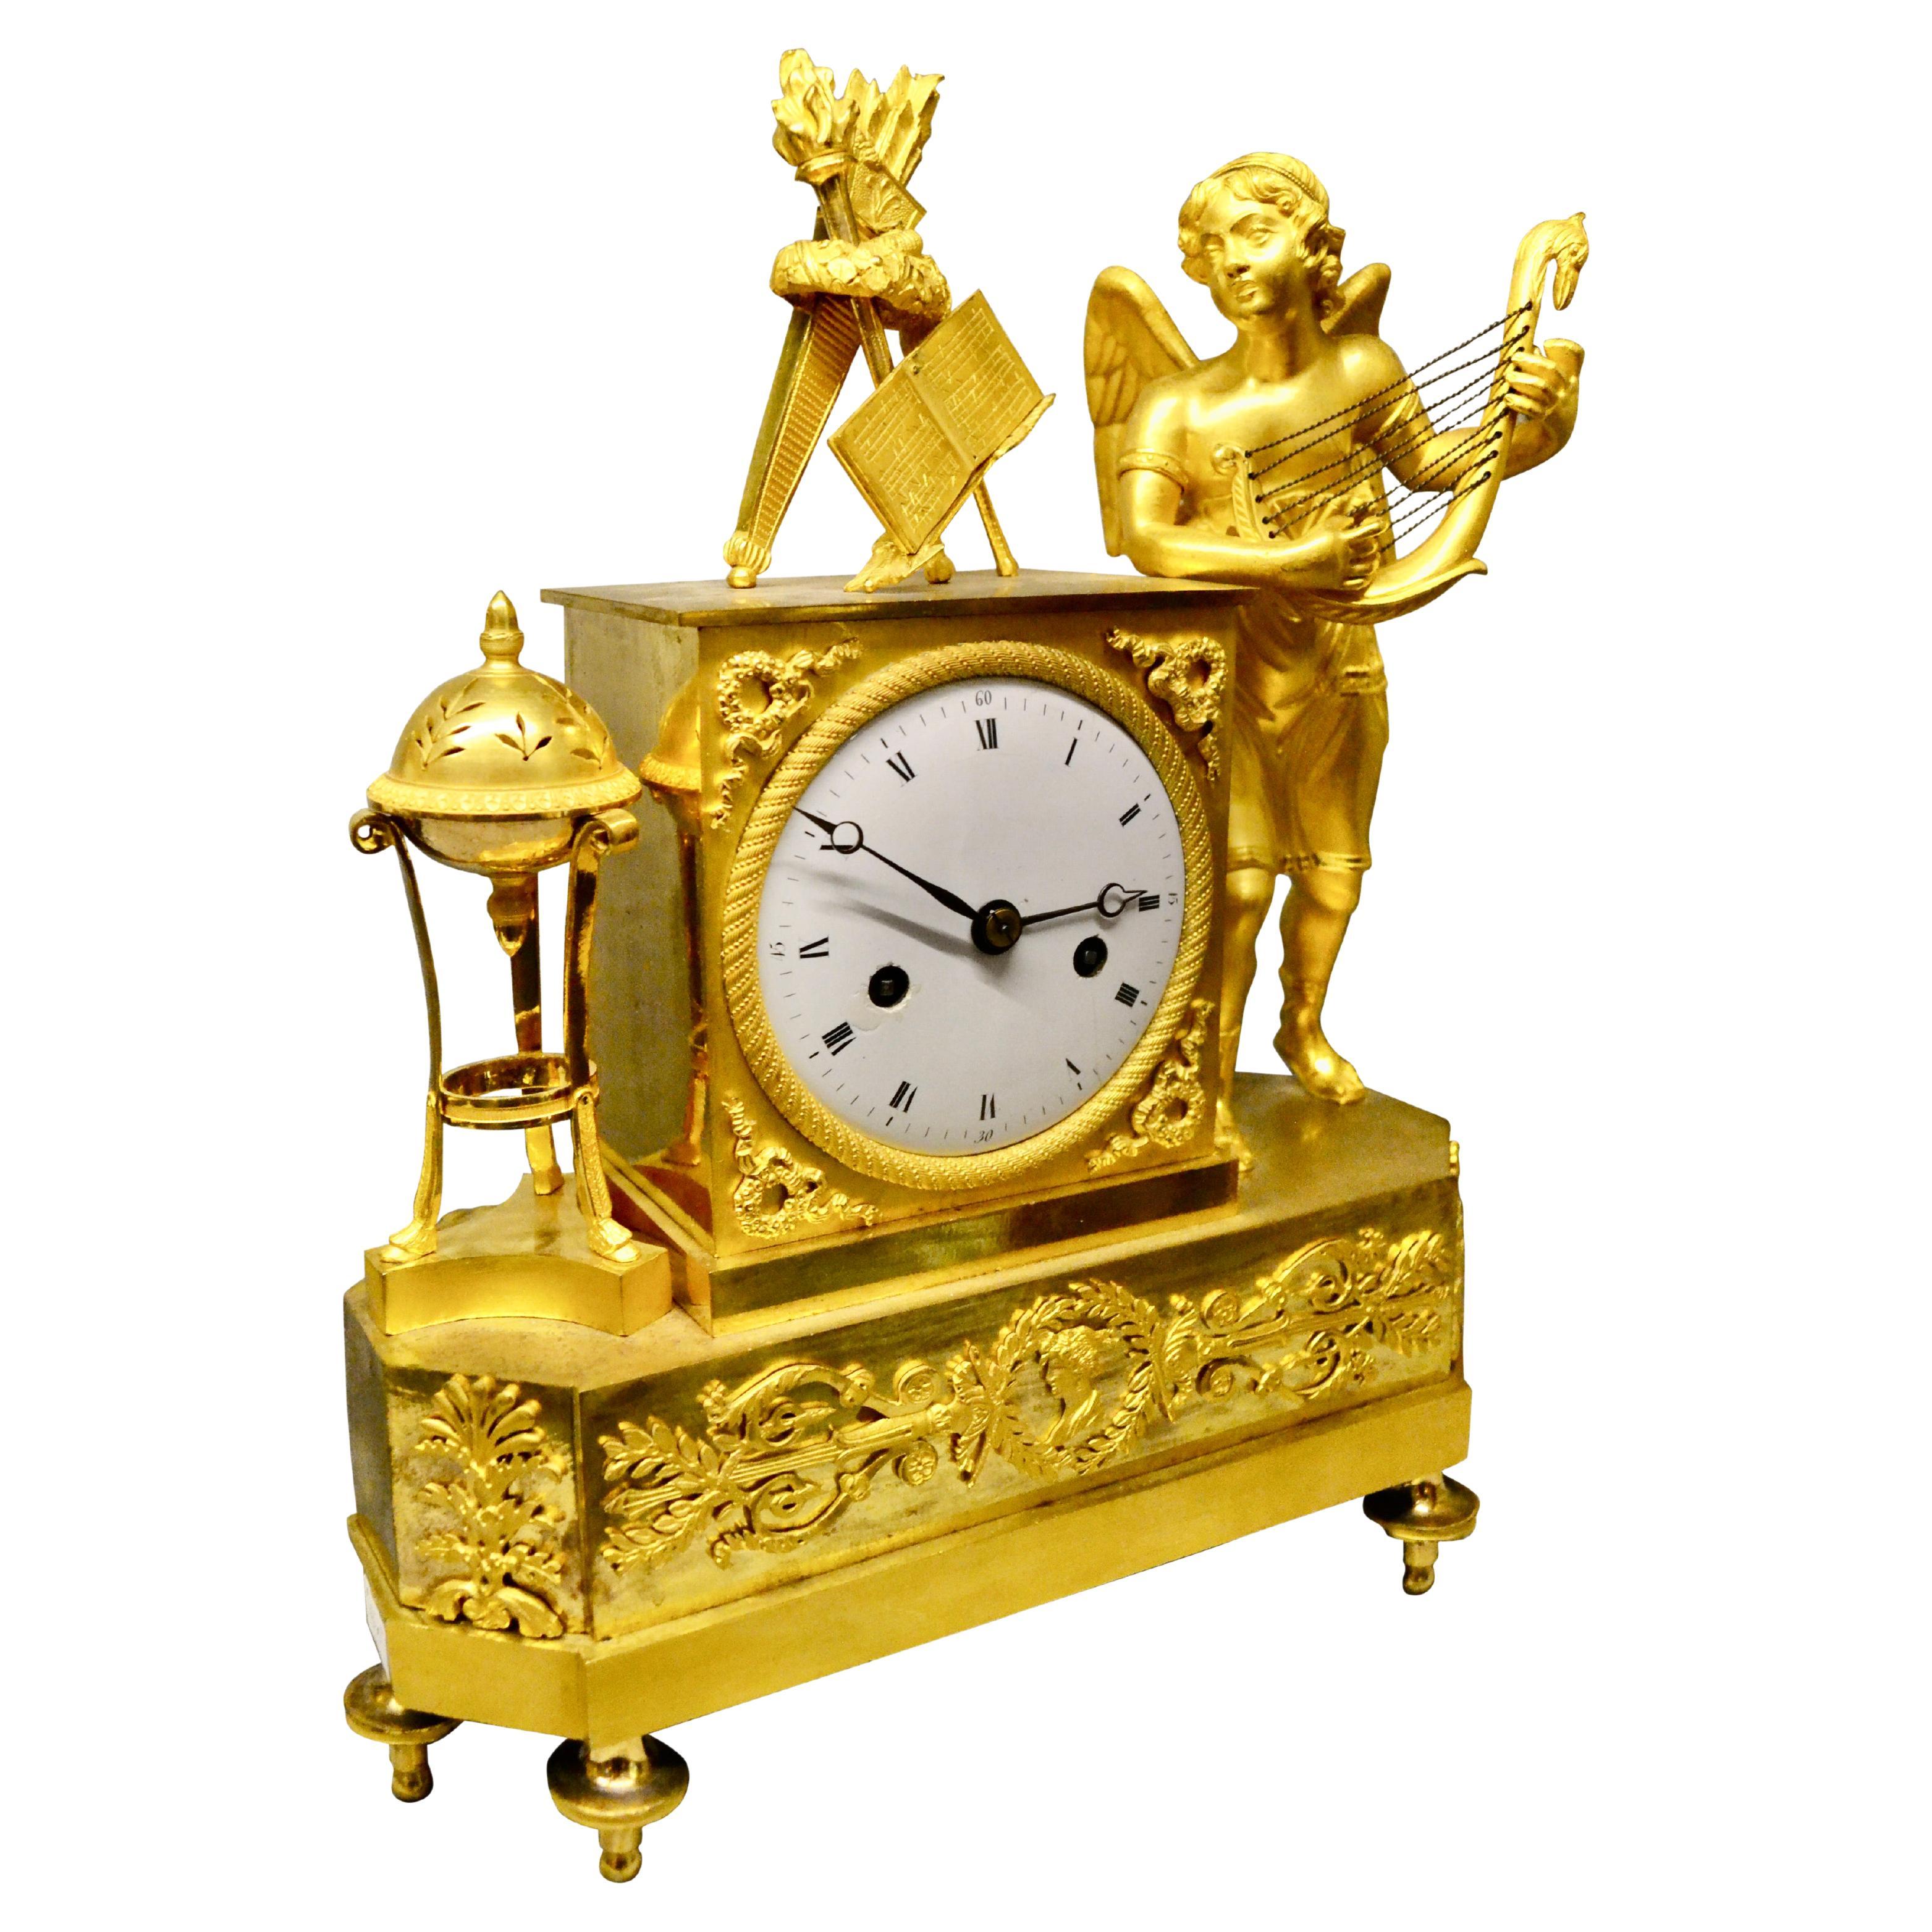 Period French Empire Mantle Clock Depicting a Winged Cupid Playing a Lute